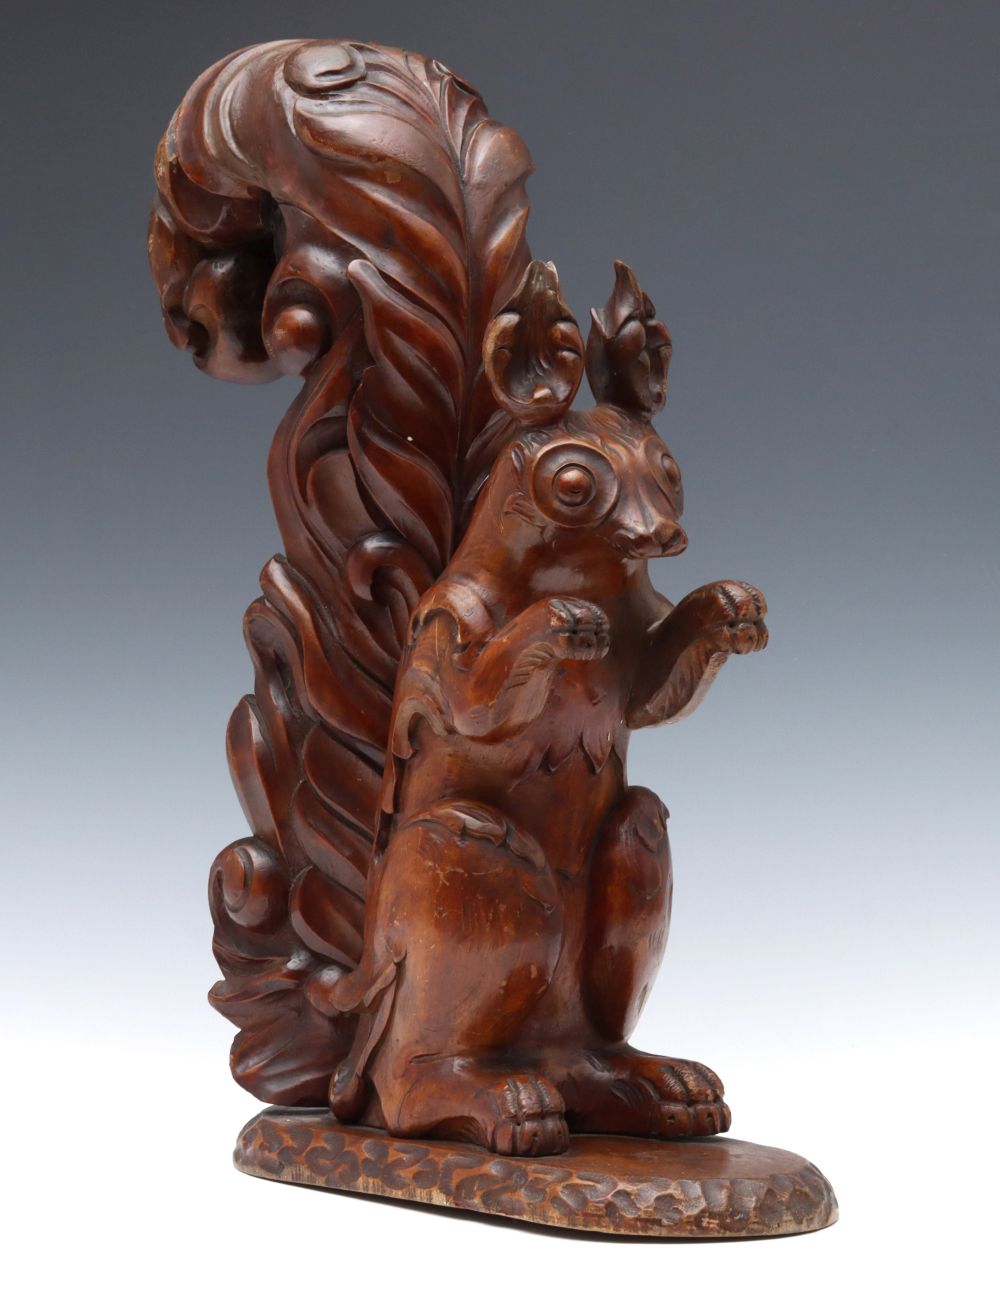 AN EARLY 20TH C. CARVED WALNUT SCULPTURE SIGNED MACABO